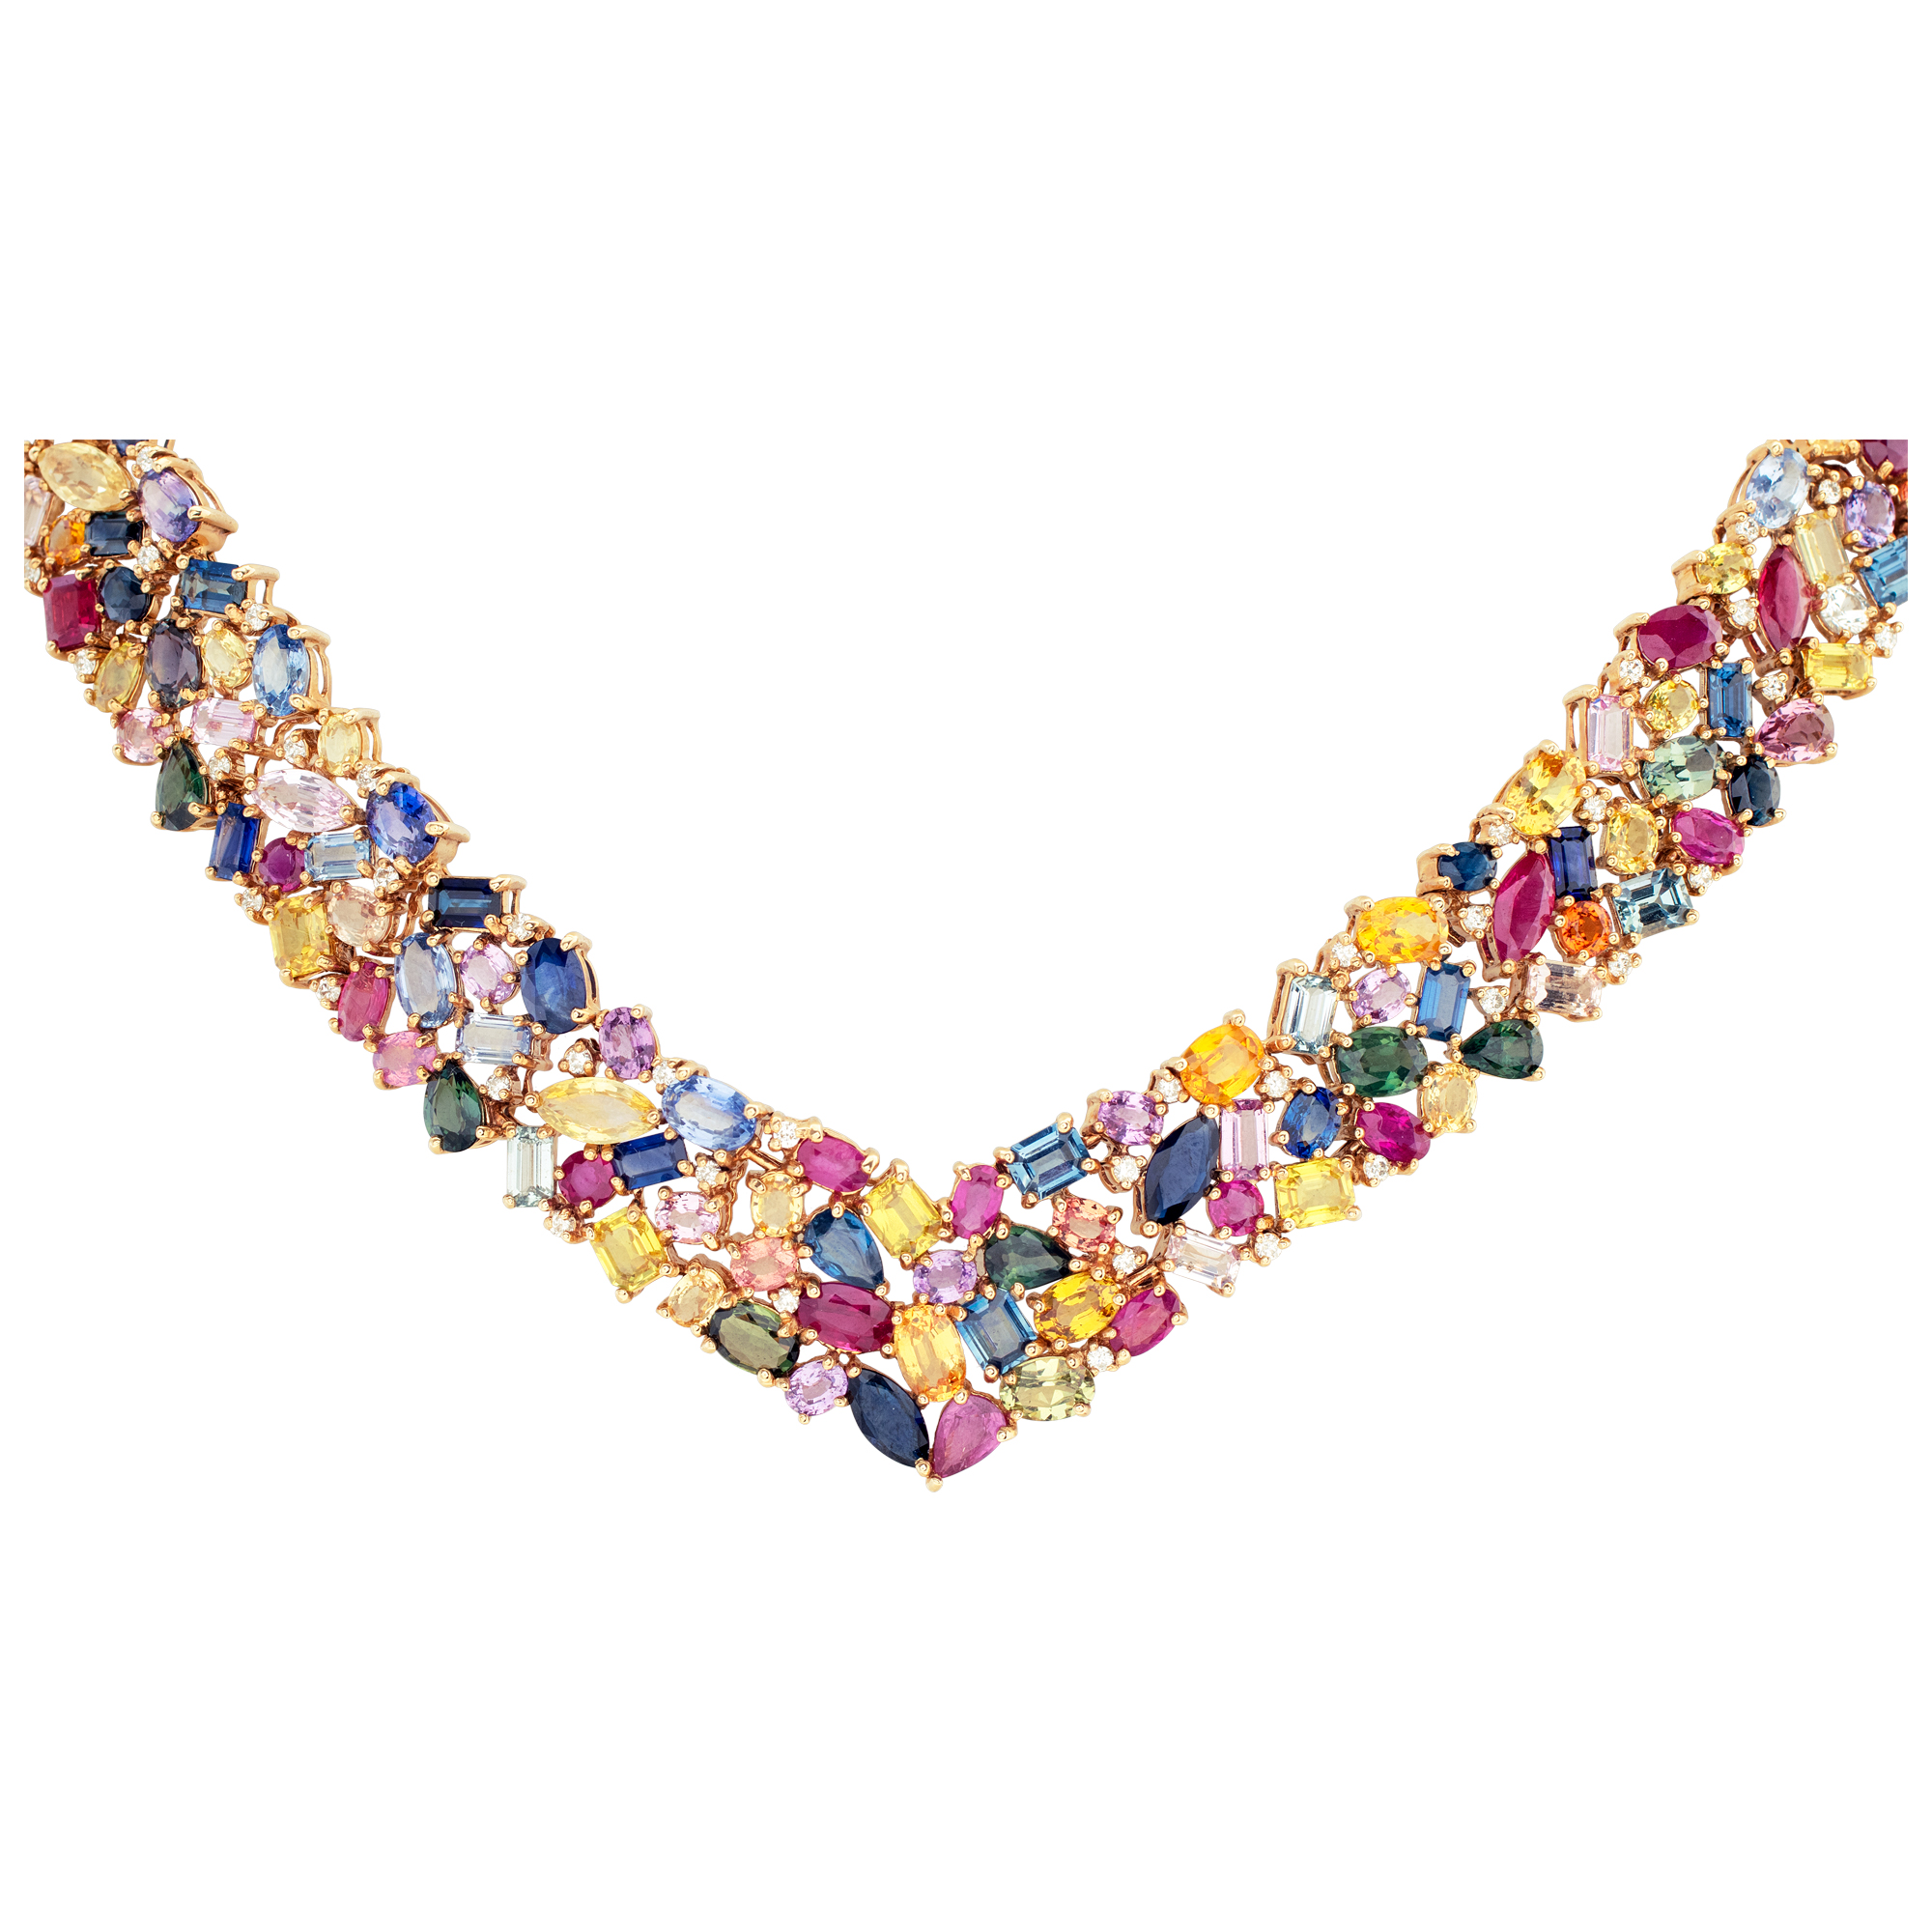 "Tutti Frutti" necklace with over 110 carats medley of various shape cut semi precious stones set in 14k